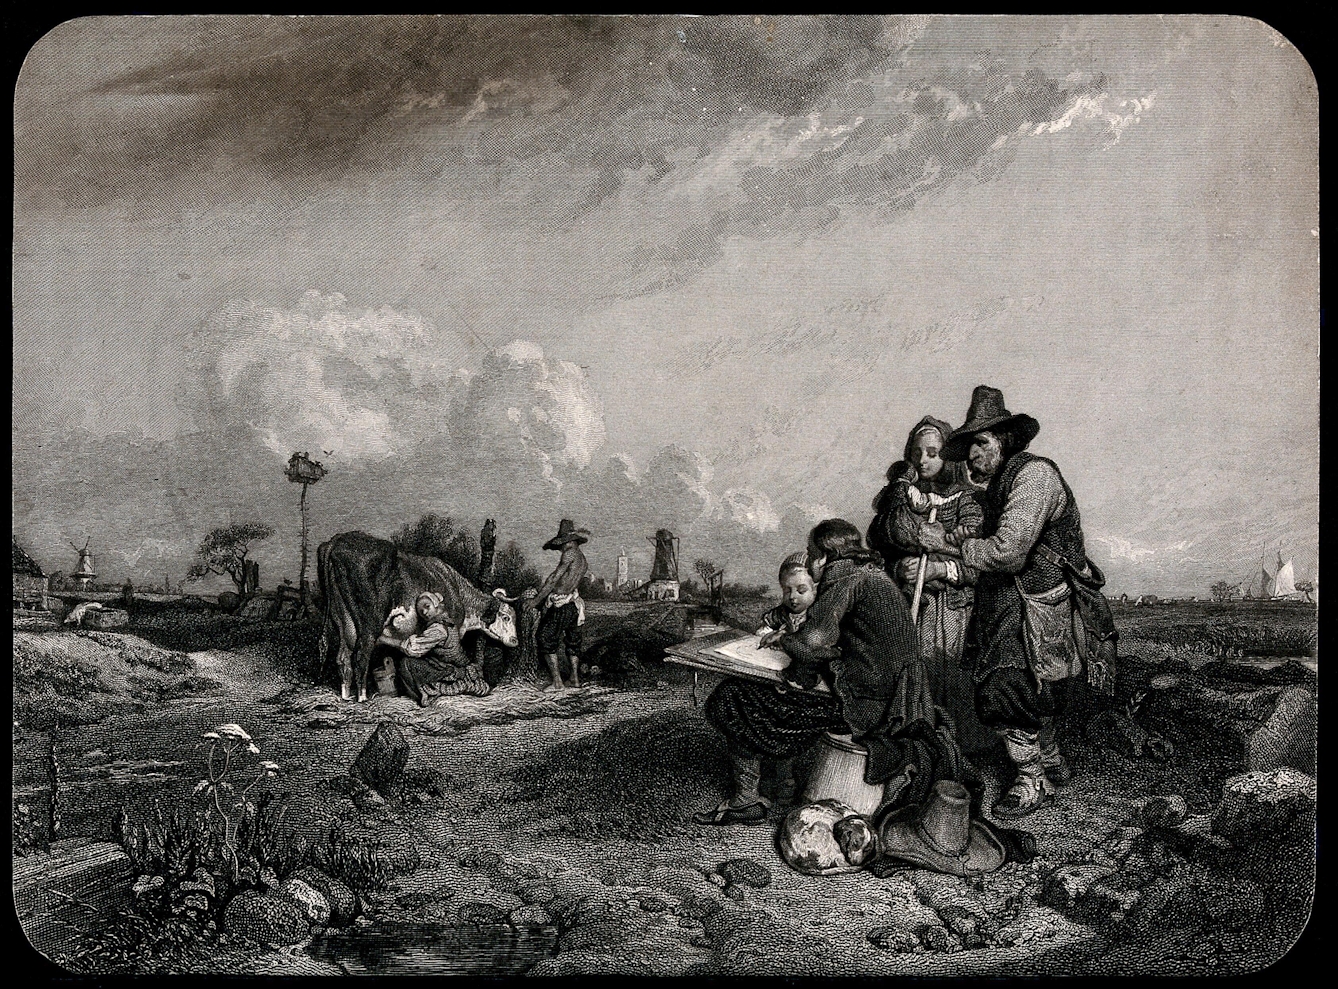 Black and white engraving showing an artist sketching a milkmaid milking a cow, who looks back at him over her shoulder. A man with his shirt tied around his waist and a large hat stands beside the cow's head. Several people standing close by the artist look down at his sketch. In the background are fields, windmills and boats on a distant river. 